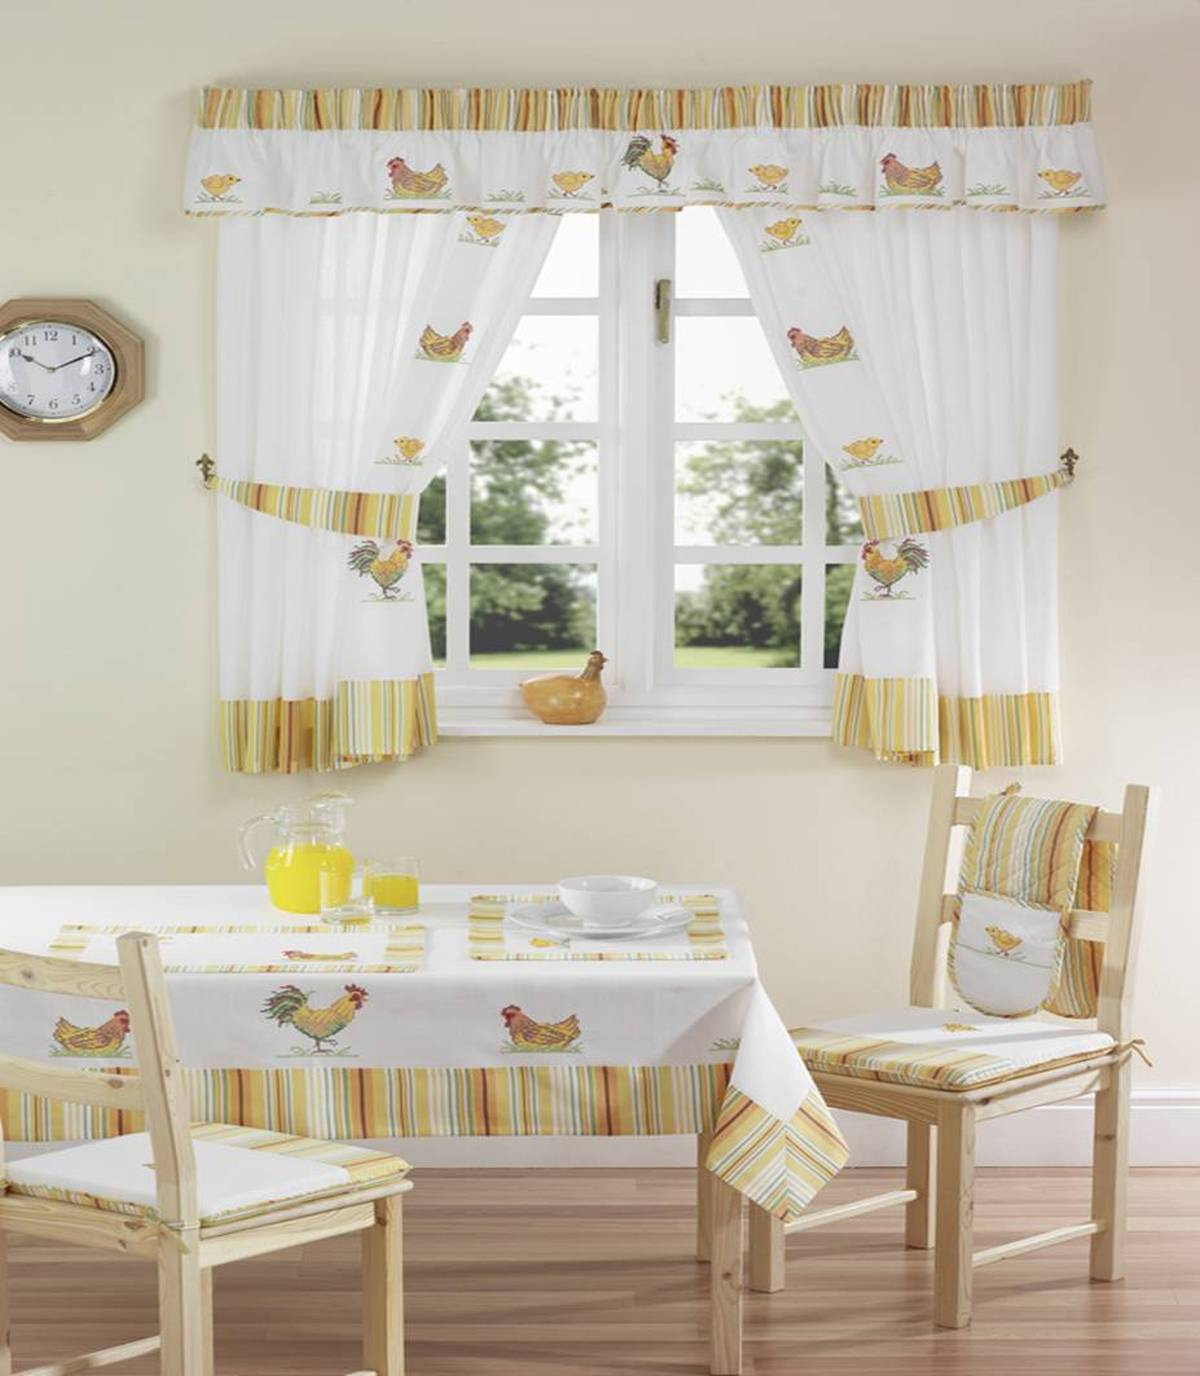 Chicken Kitchen Curtains Awesome 20 Useful Ideas Rooster Kitchen Curtains As Part Of Chicken Kitchen Curtains 2 